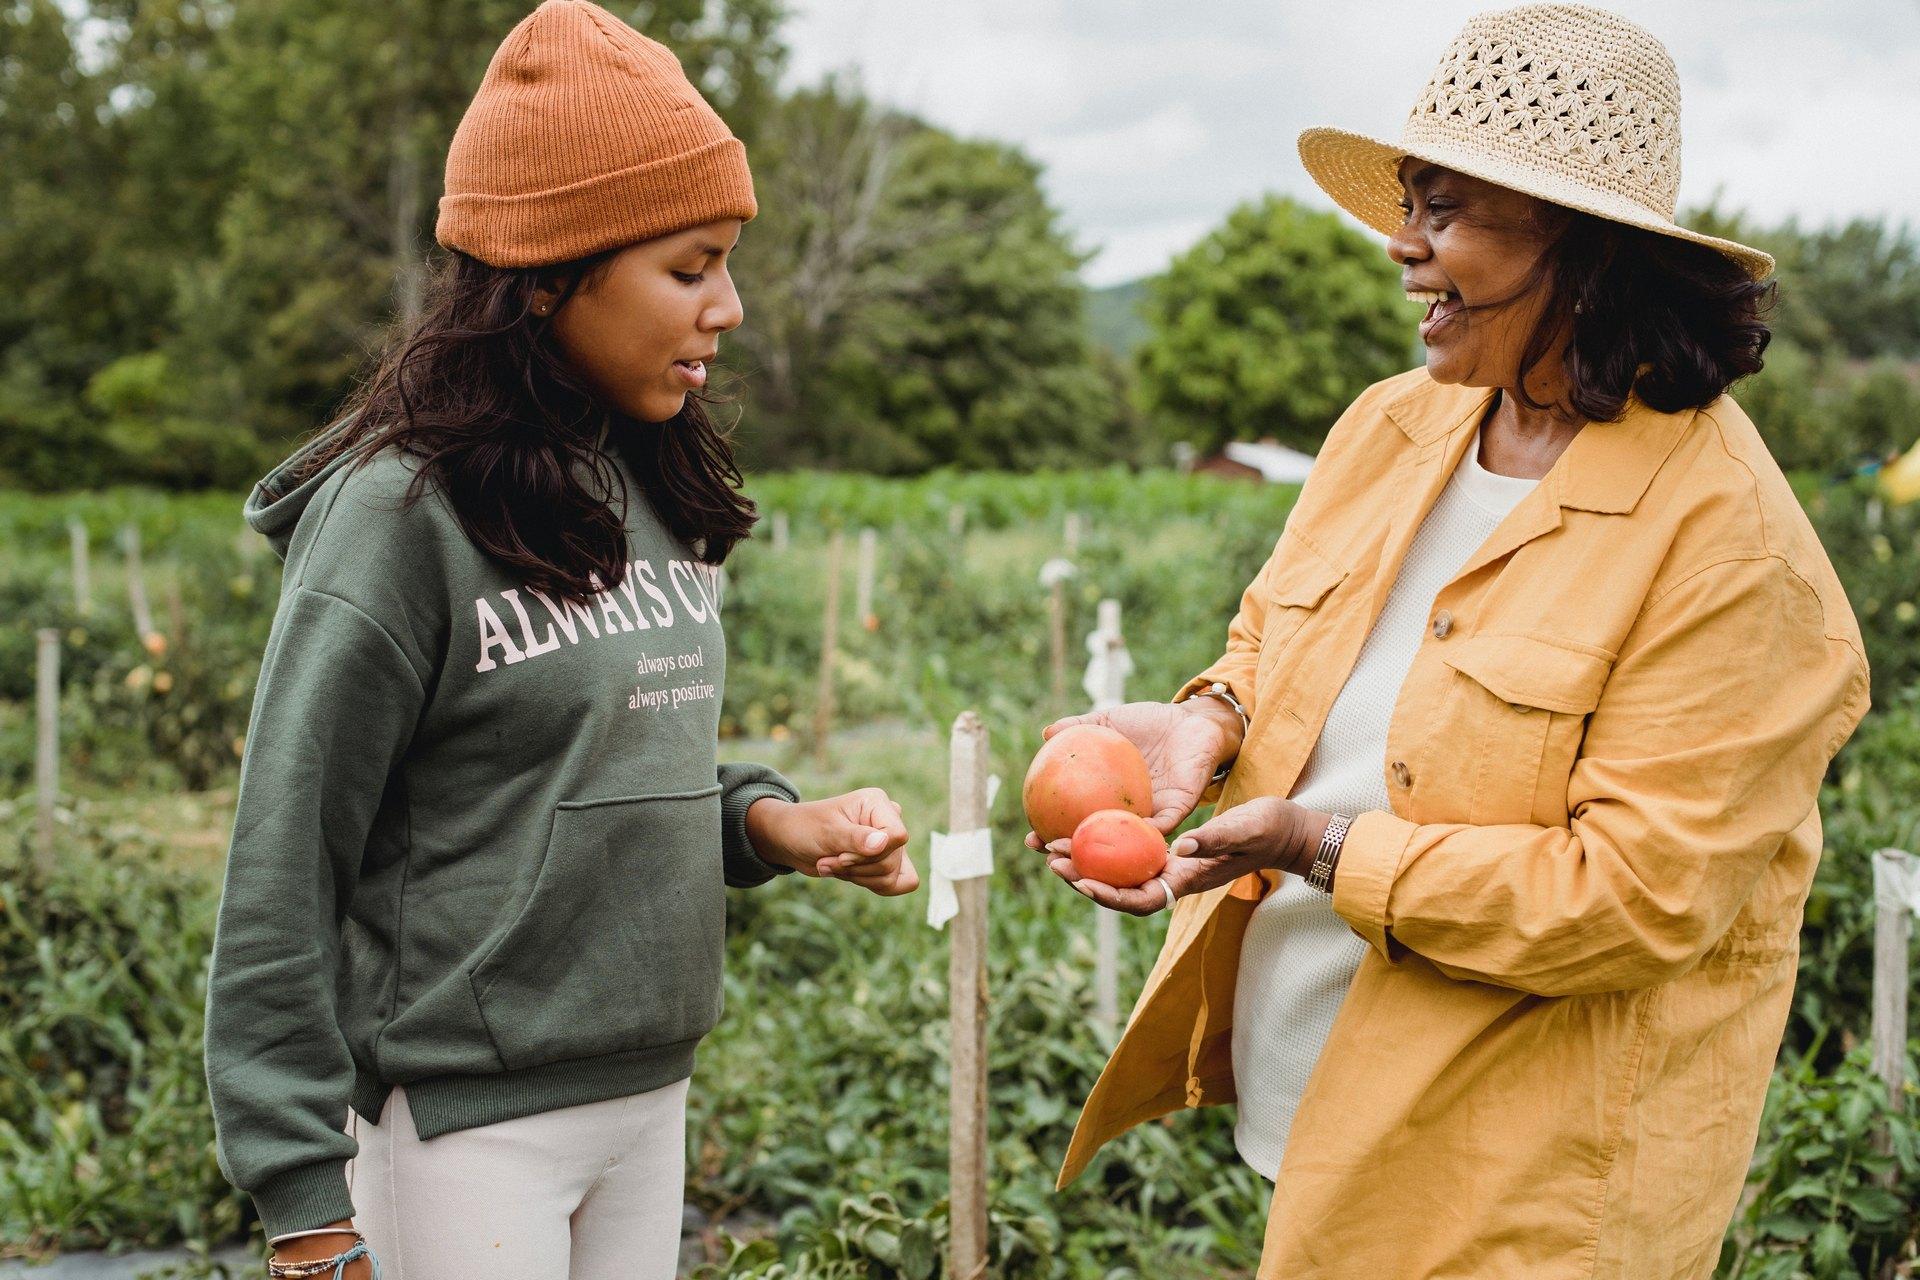 Mother and daughter share joy of growing tomatoes